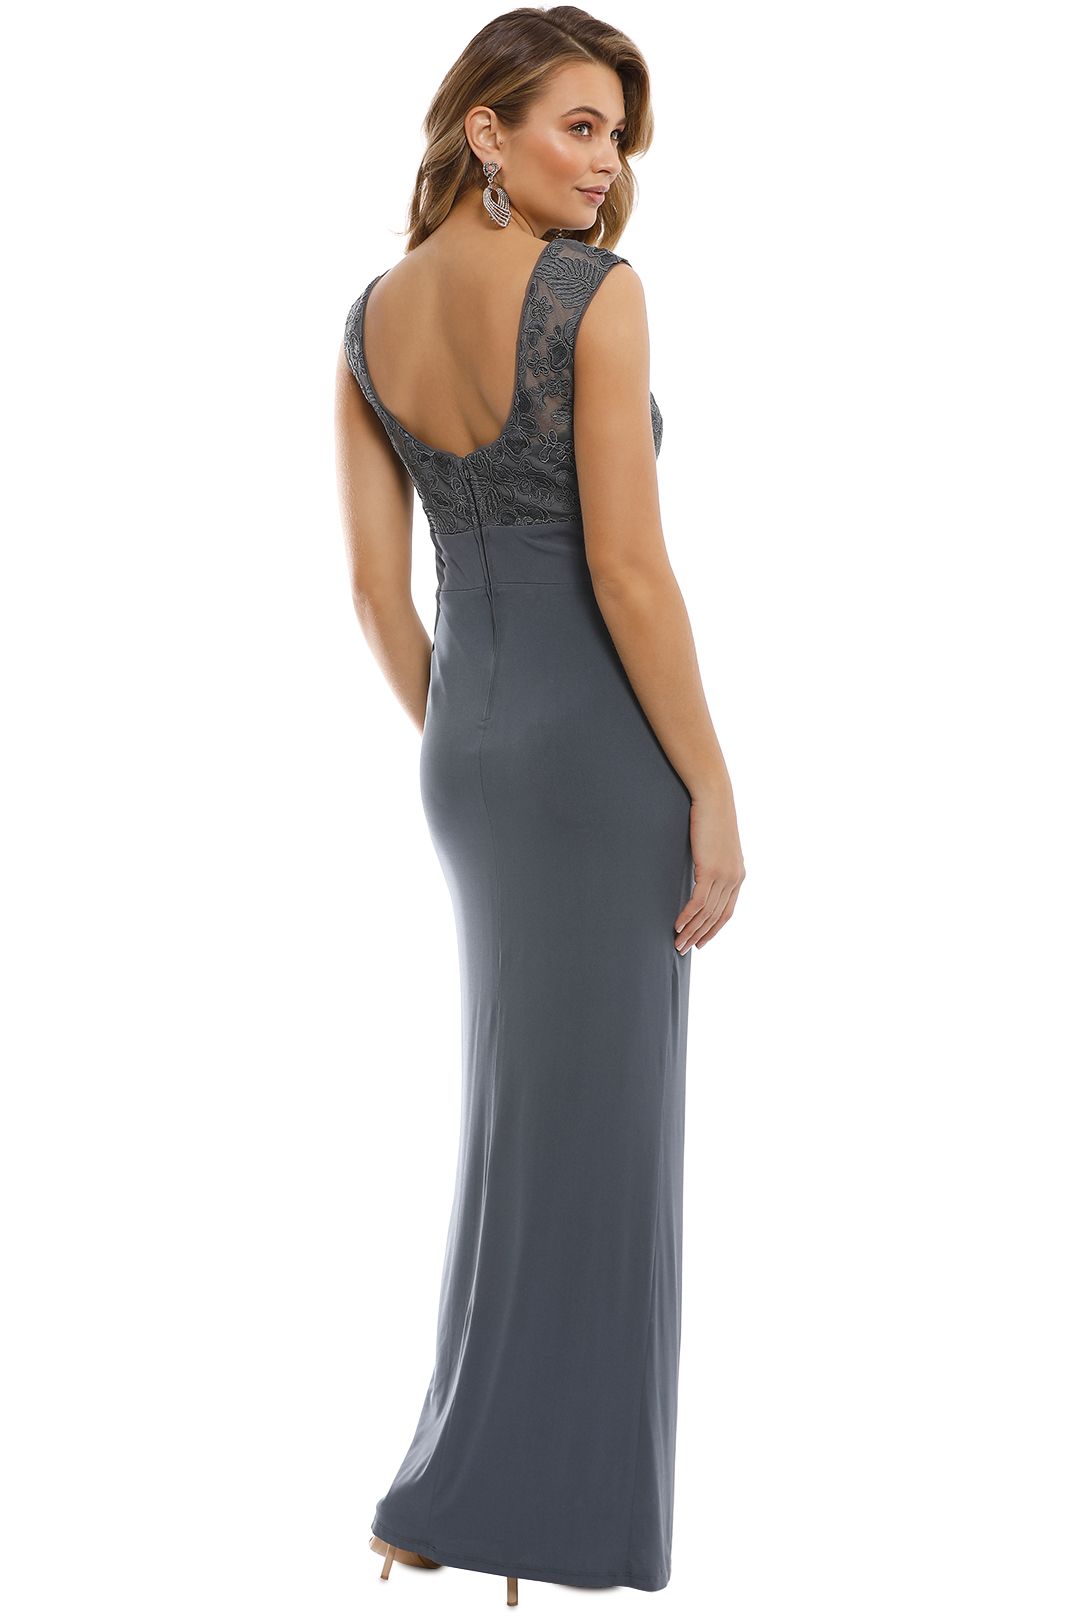 Montique - Maya Embroidered Gown - Grey - Back